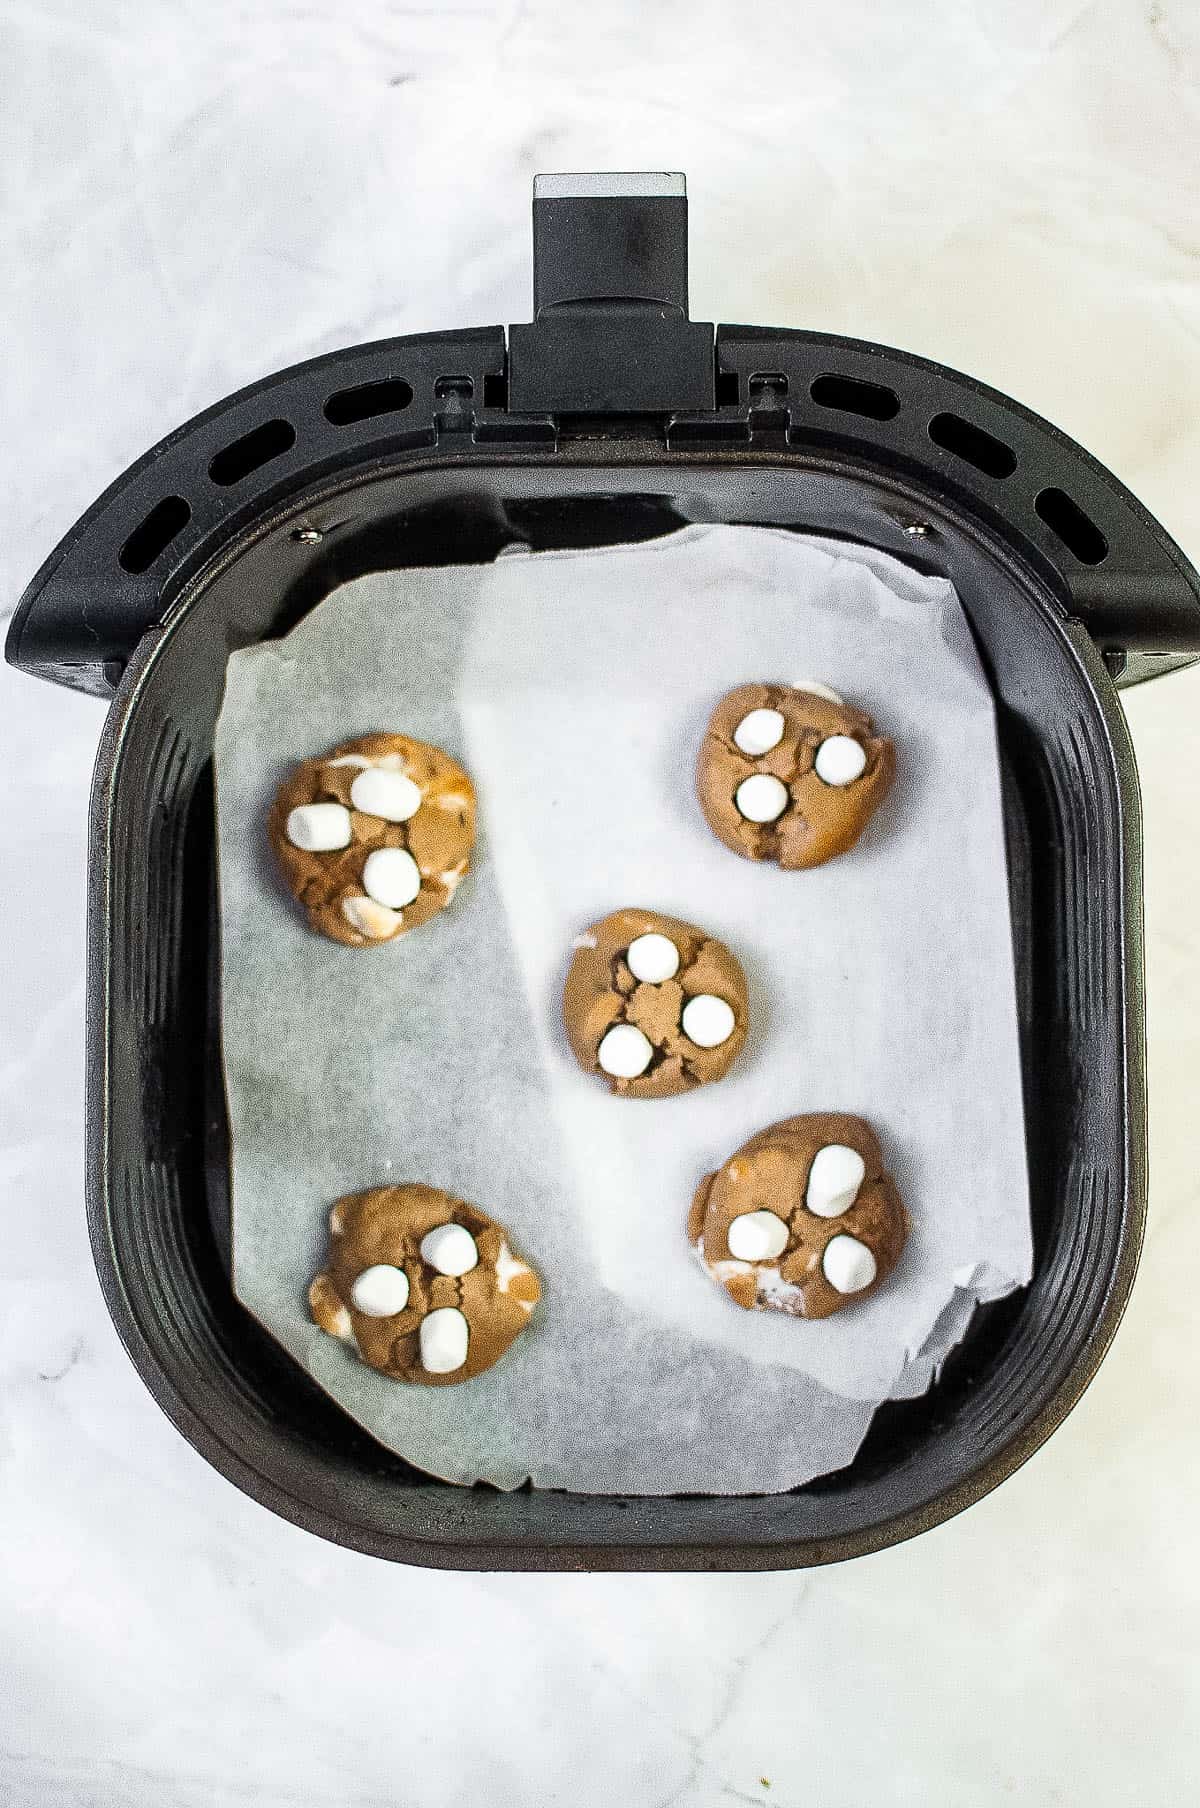 Air fryer filled with hot cocoa cookies.